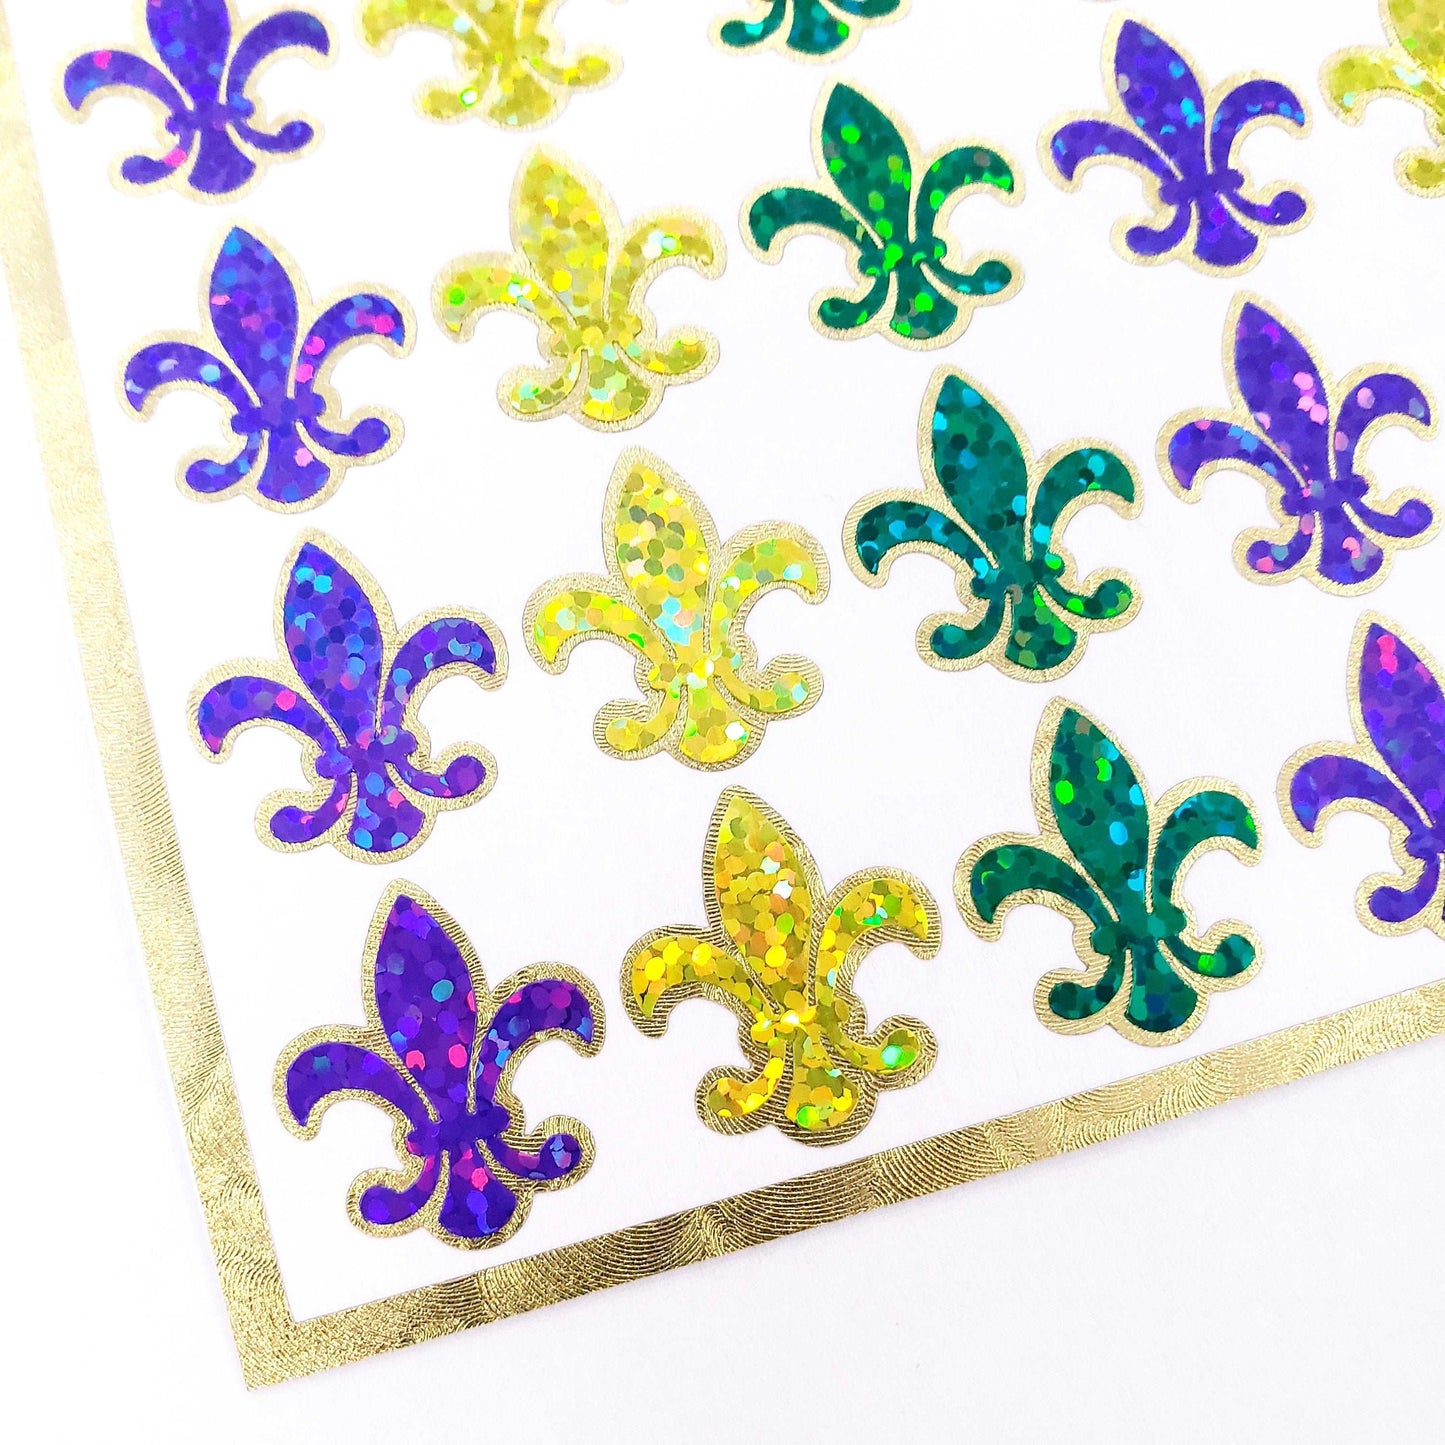 Mardi Gras Stickers, set of 48 purple green and gold French Fleur de Lis glitter stickers, Louisiana flower symbol, Fat Tuesday stickers.